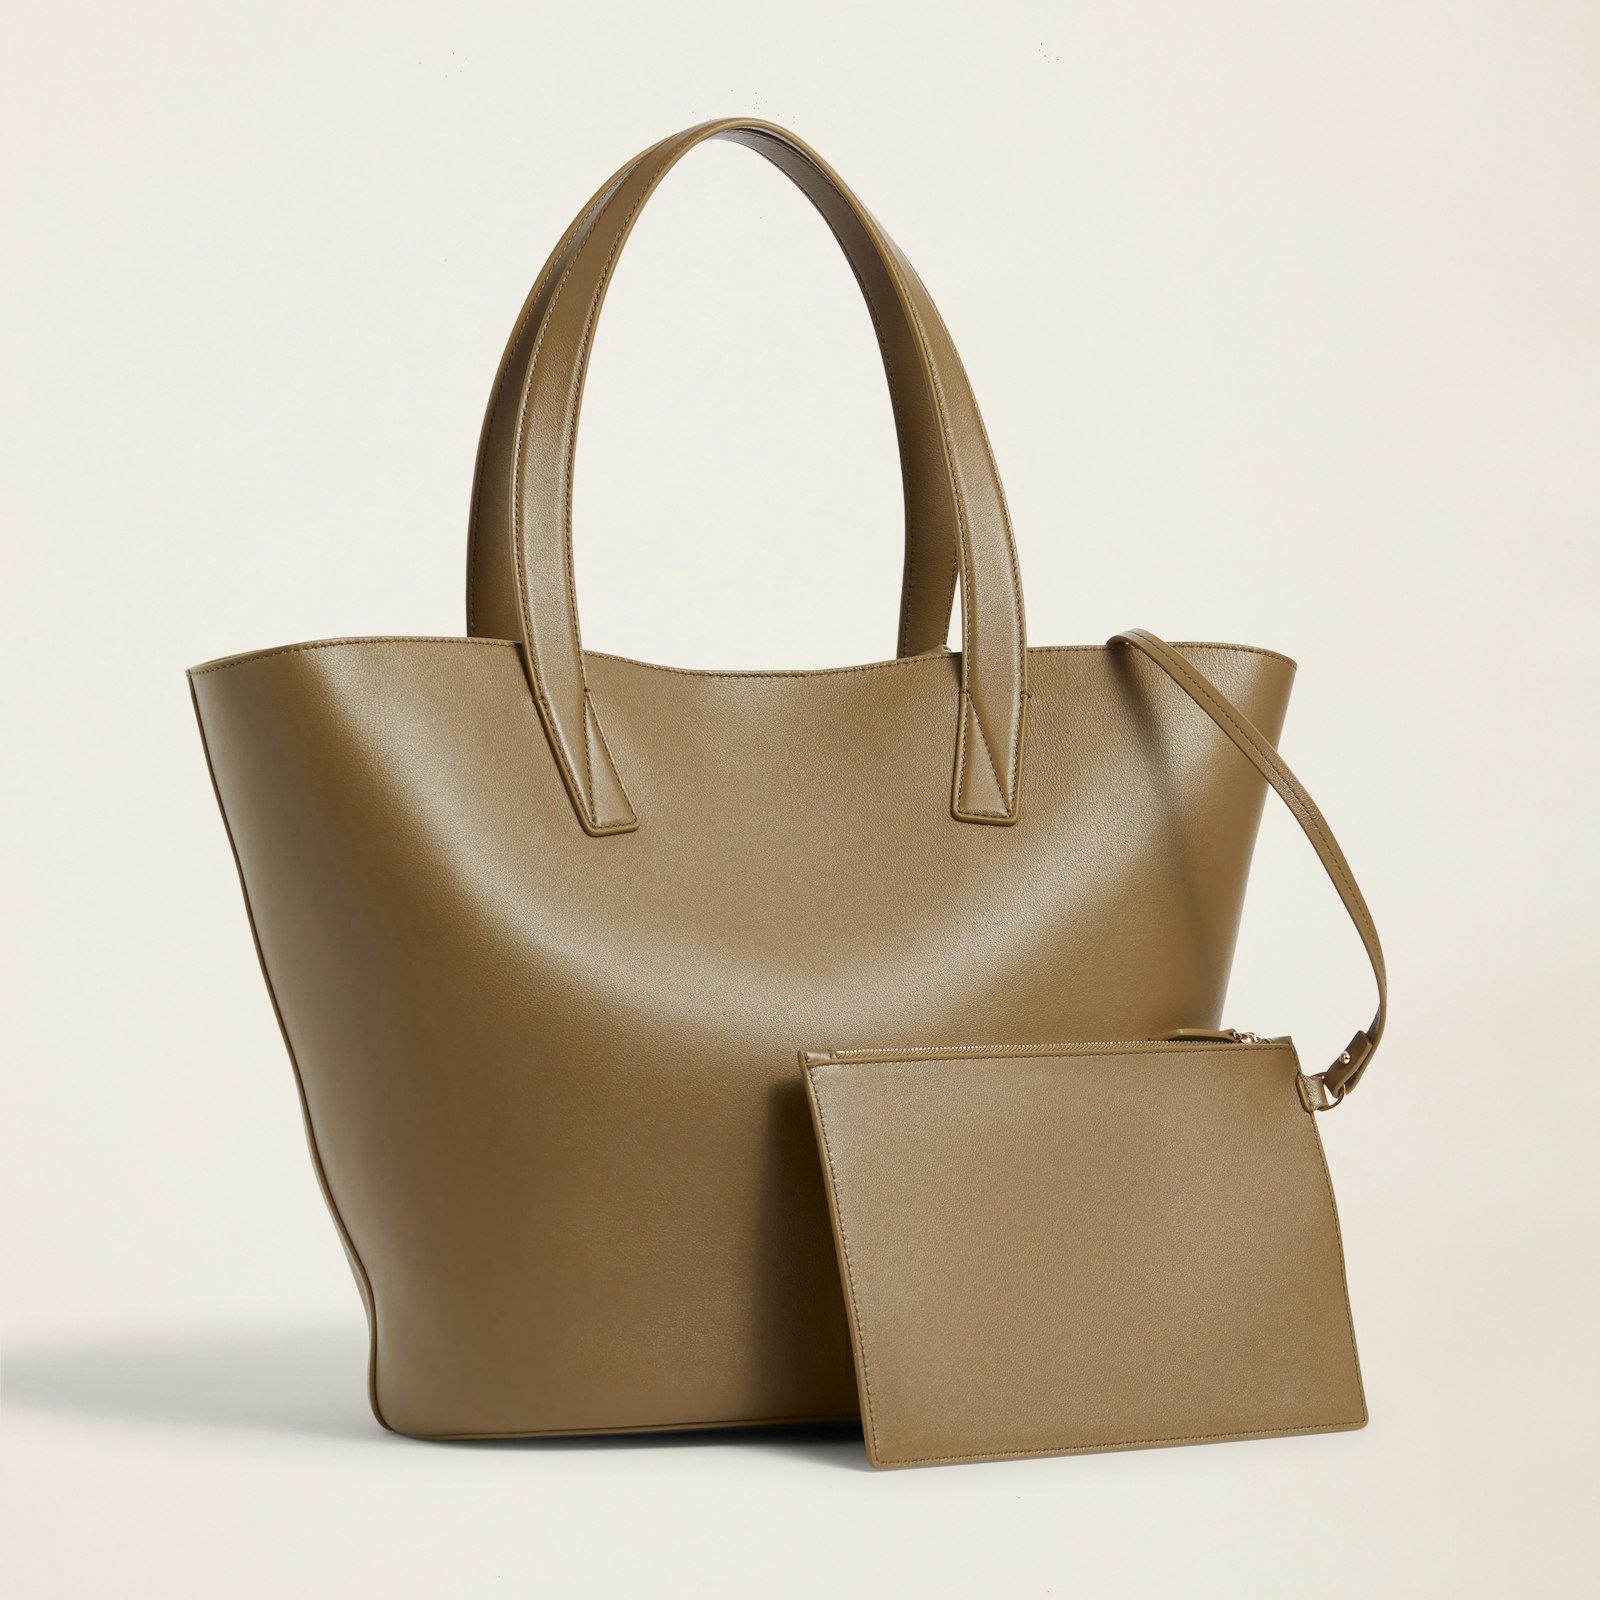 Leather_Beach_Tote_Fatigue_LightGold_1x1_Back_406.jpg